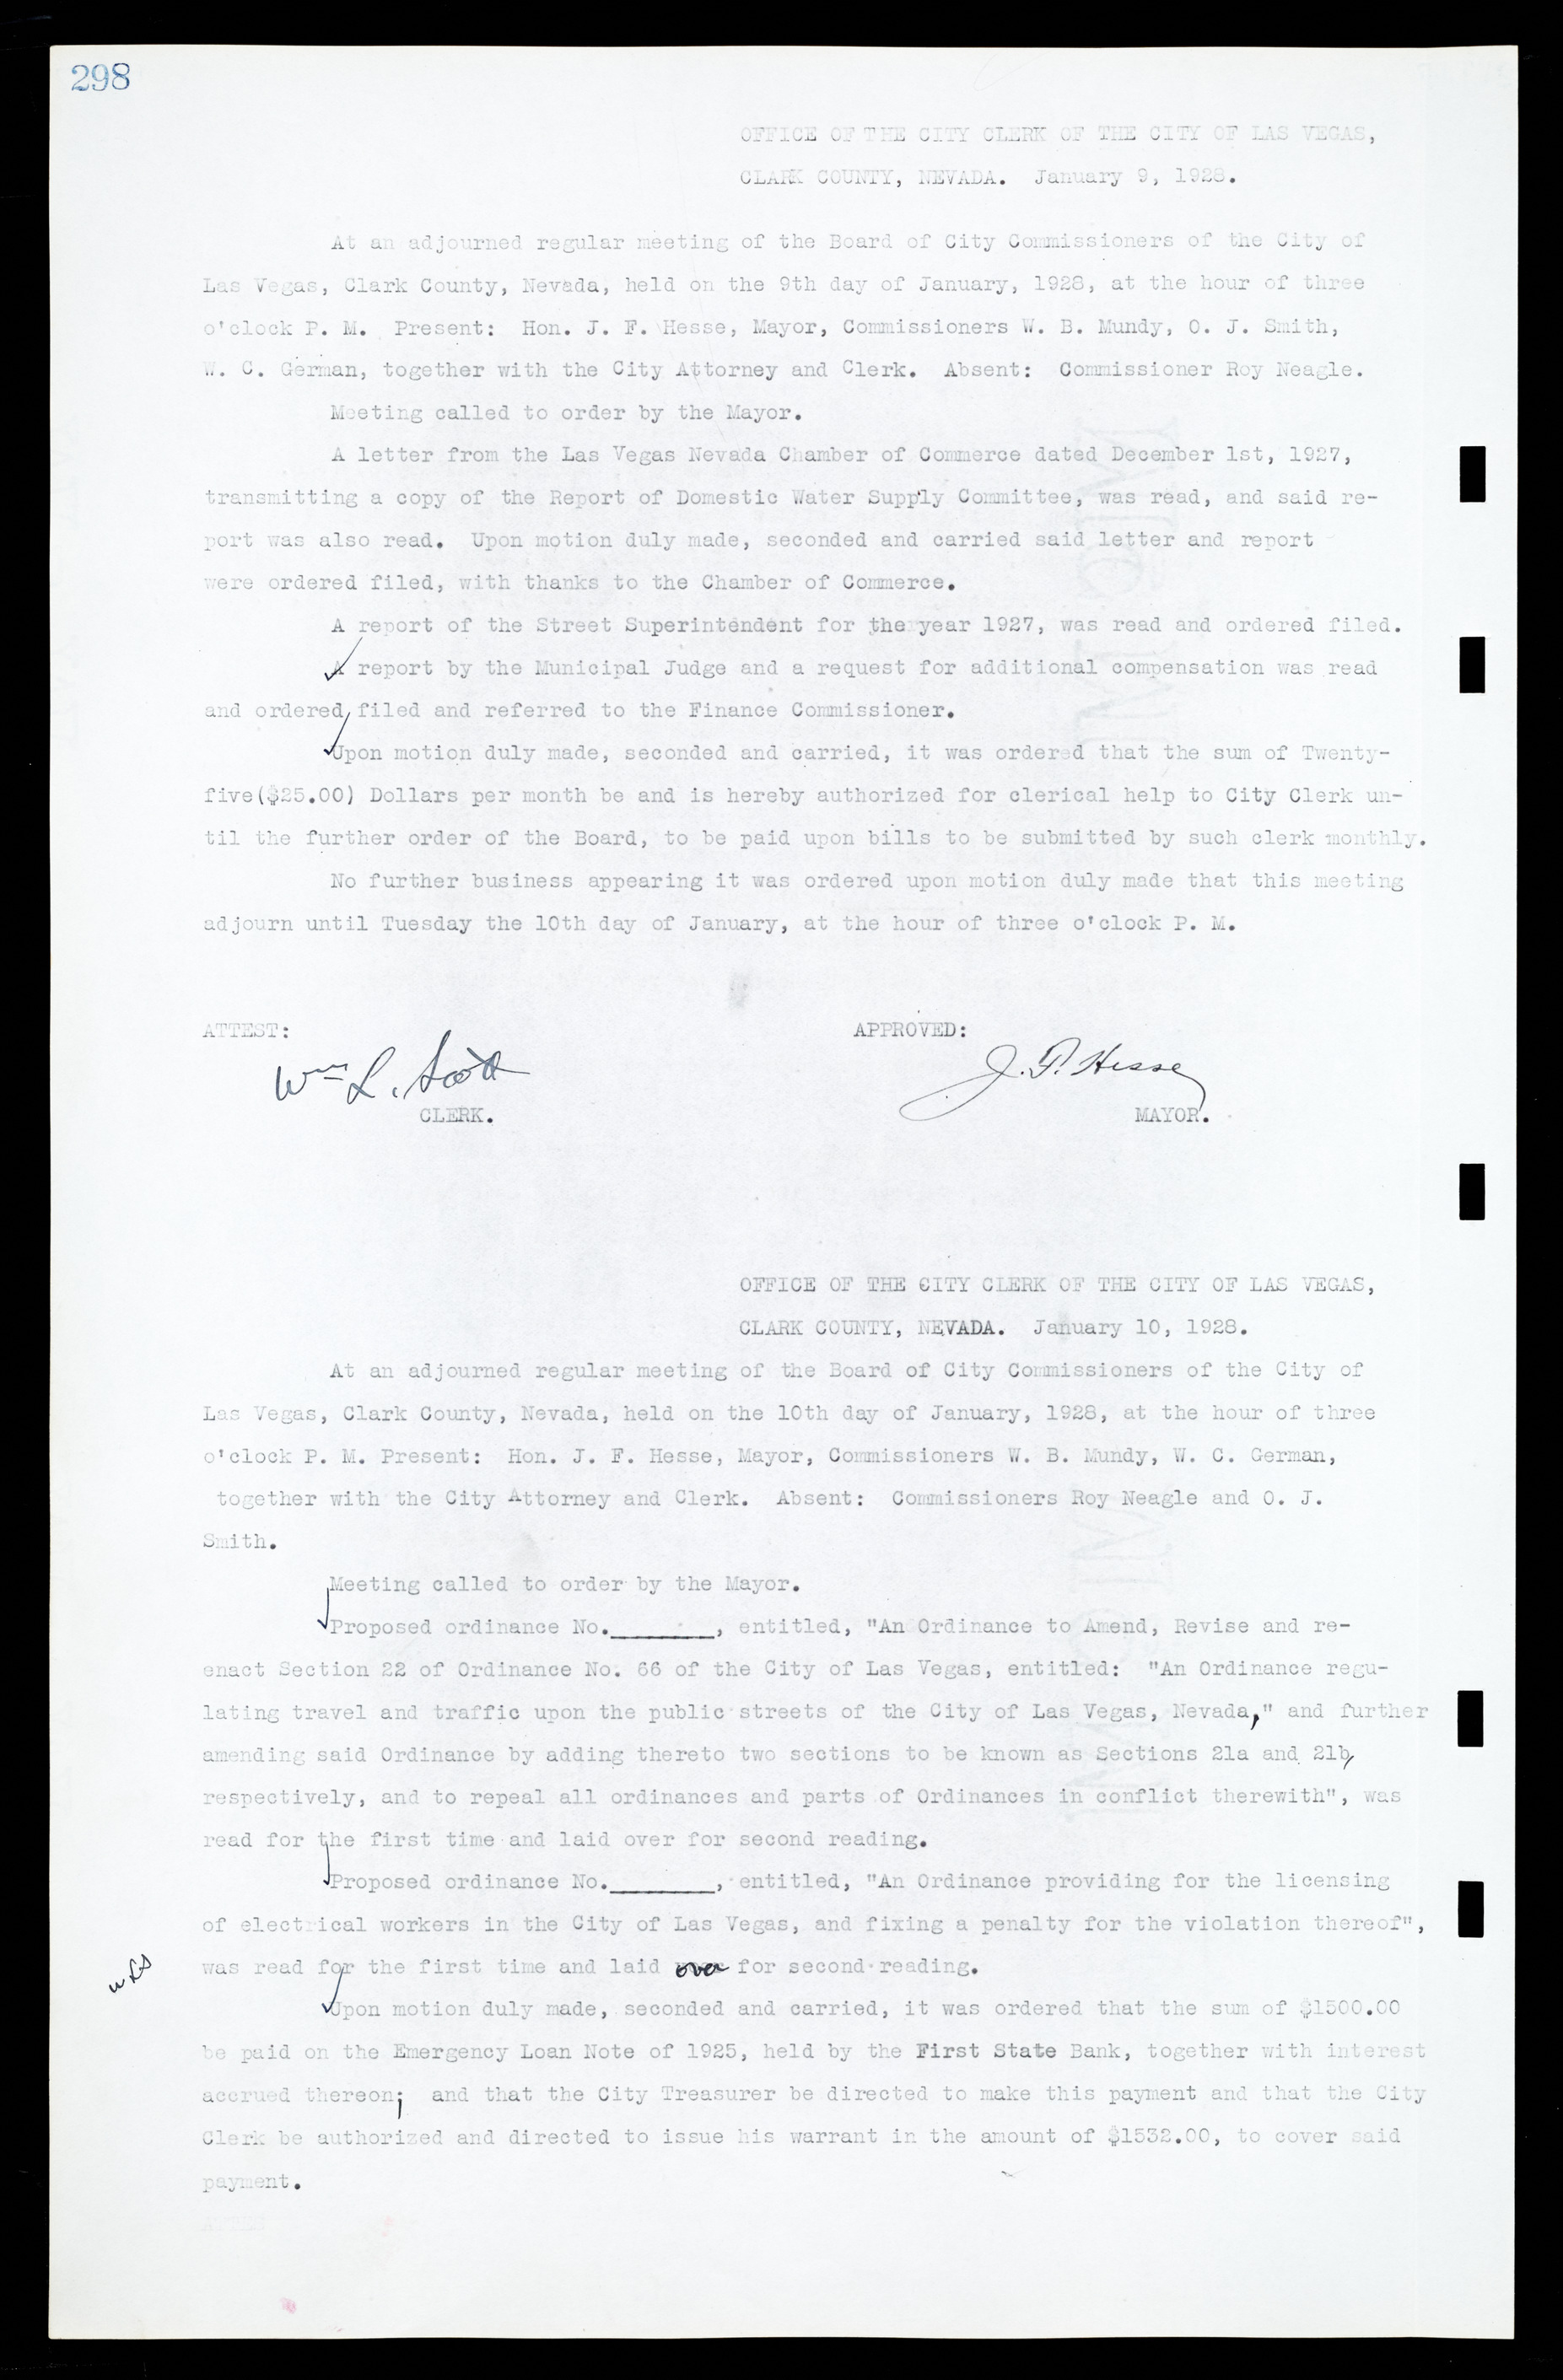 Las Vegas City Commission Minutes, March 1, 1922 to May 10, 1929, lvc000002-307